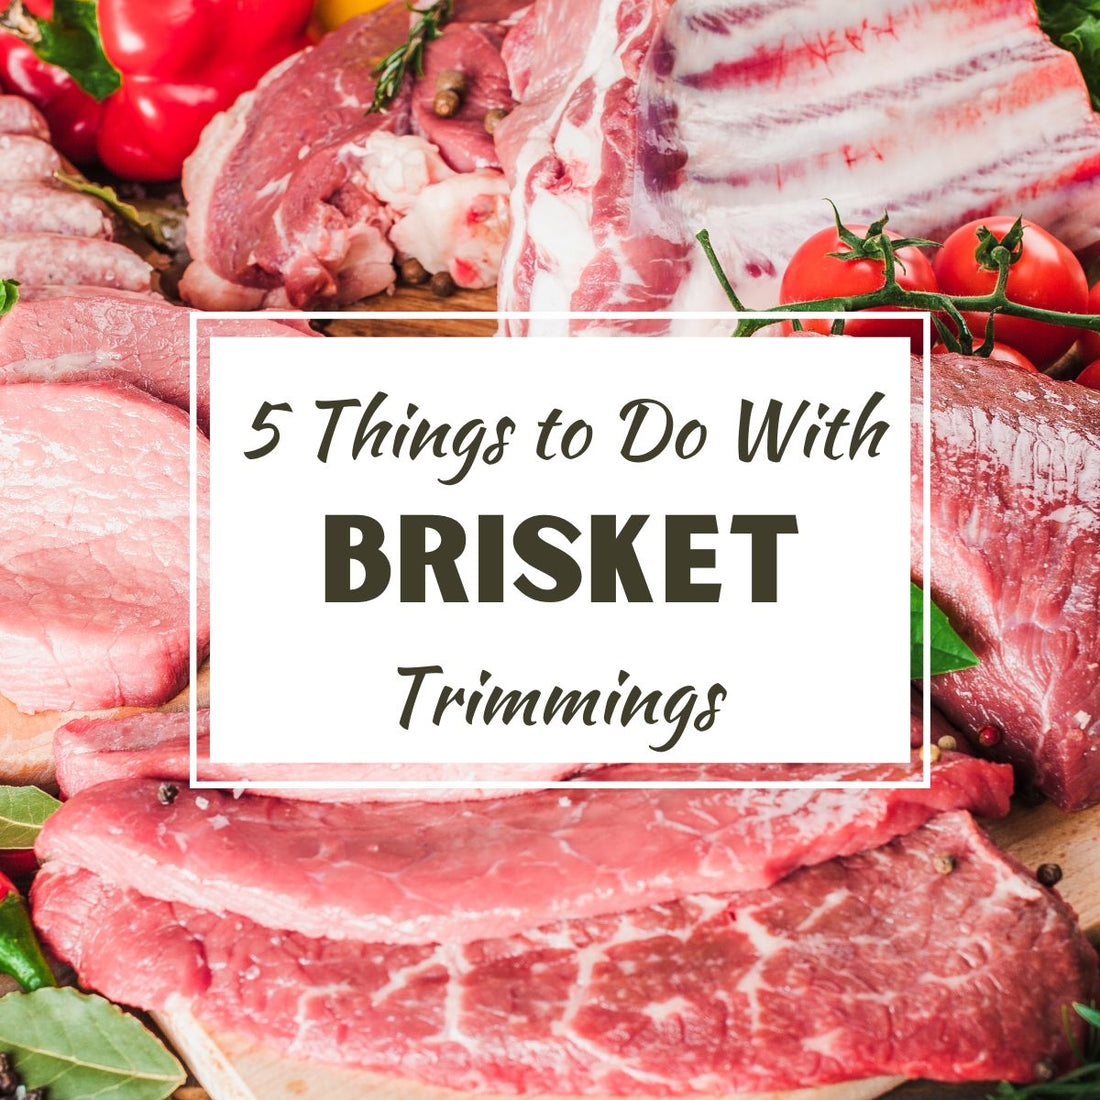 graphic design image of raw beef cuts to show what to do with brisket trimmings